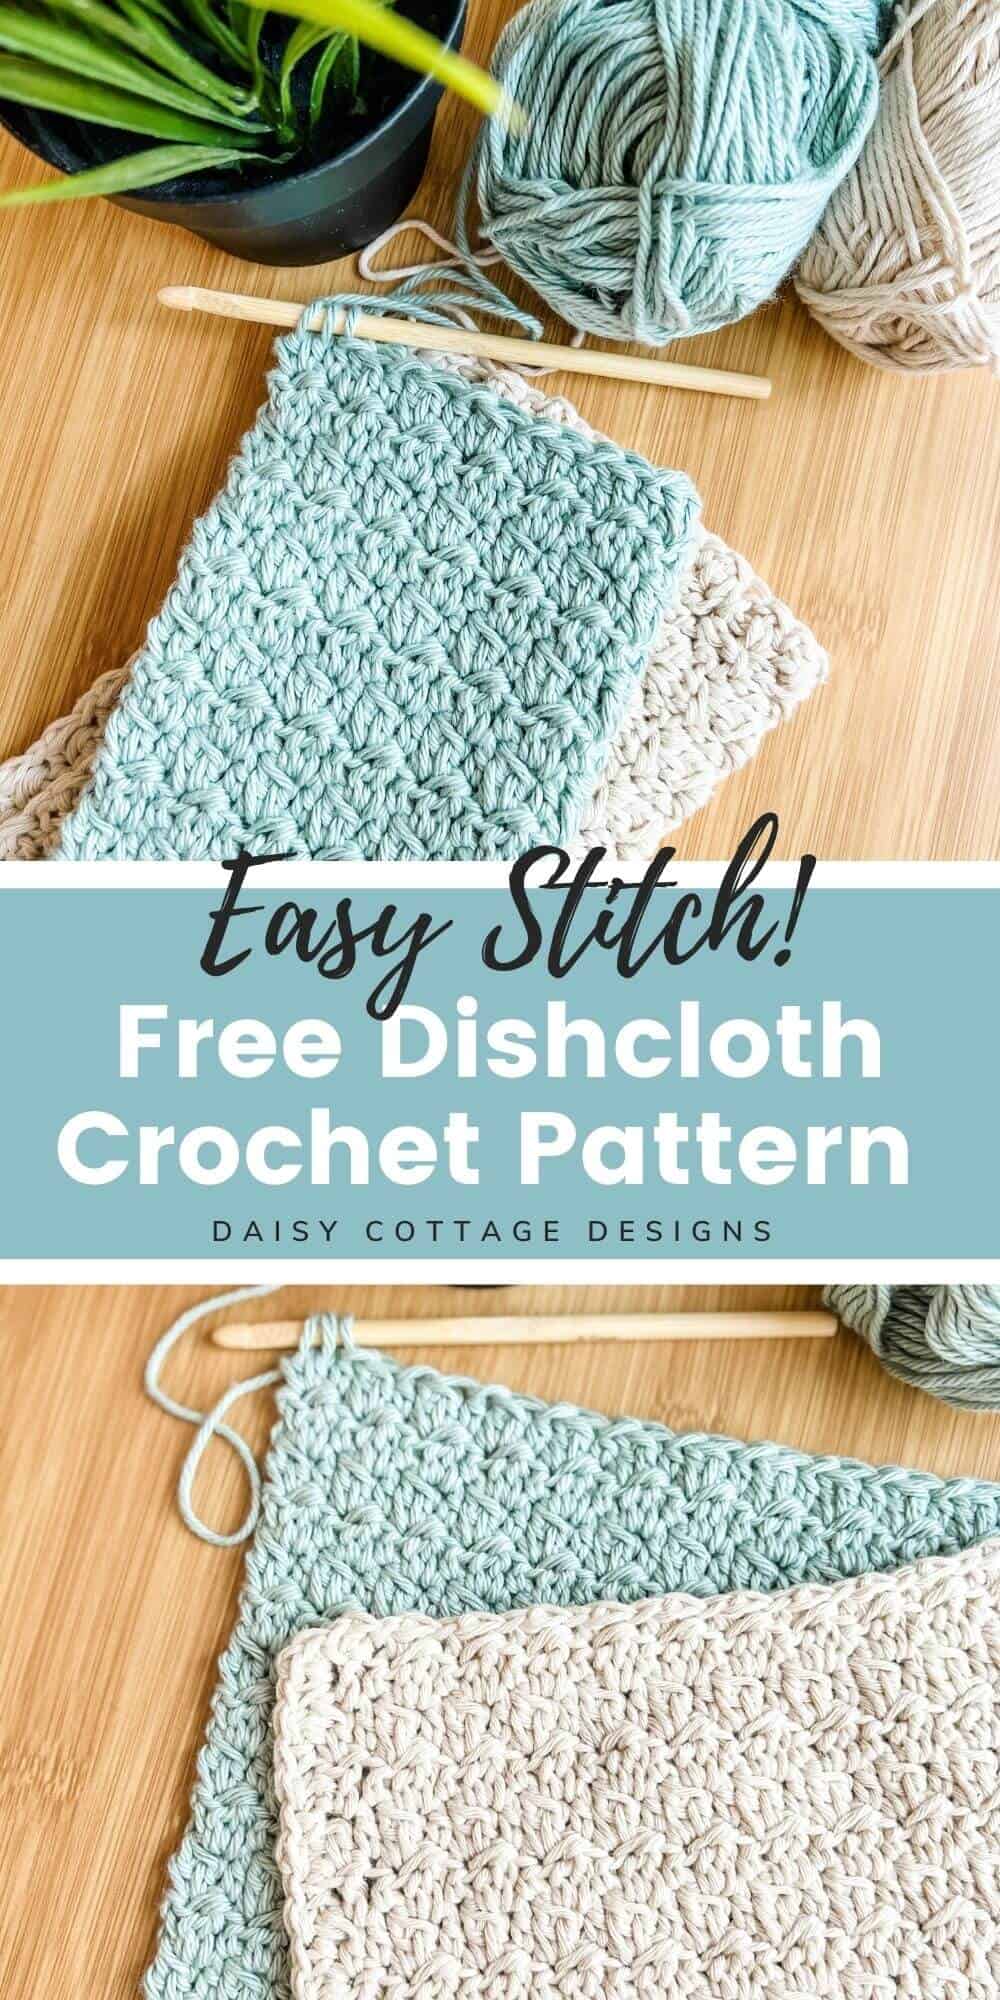 Learn how to crochet an easy dishcloth using this free crochet pattern from Daisy Cottage Designs. 